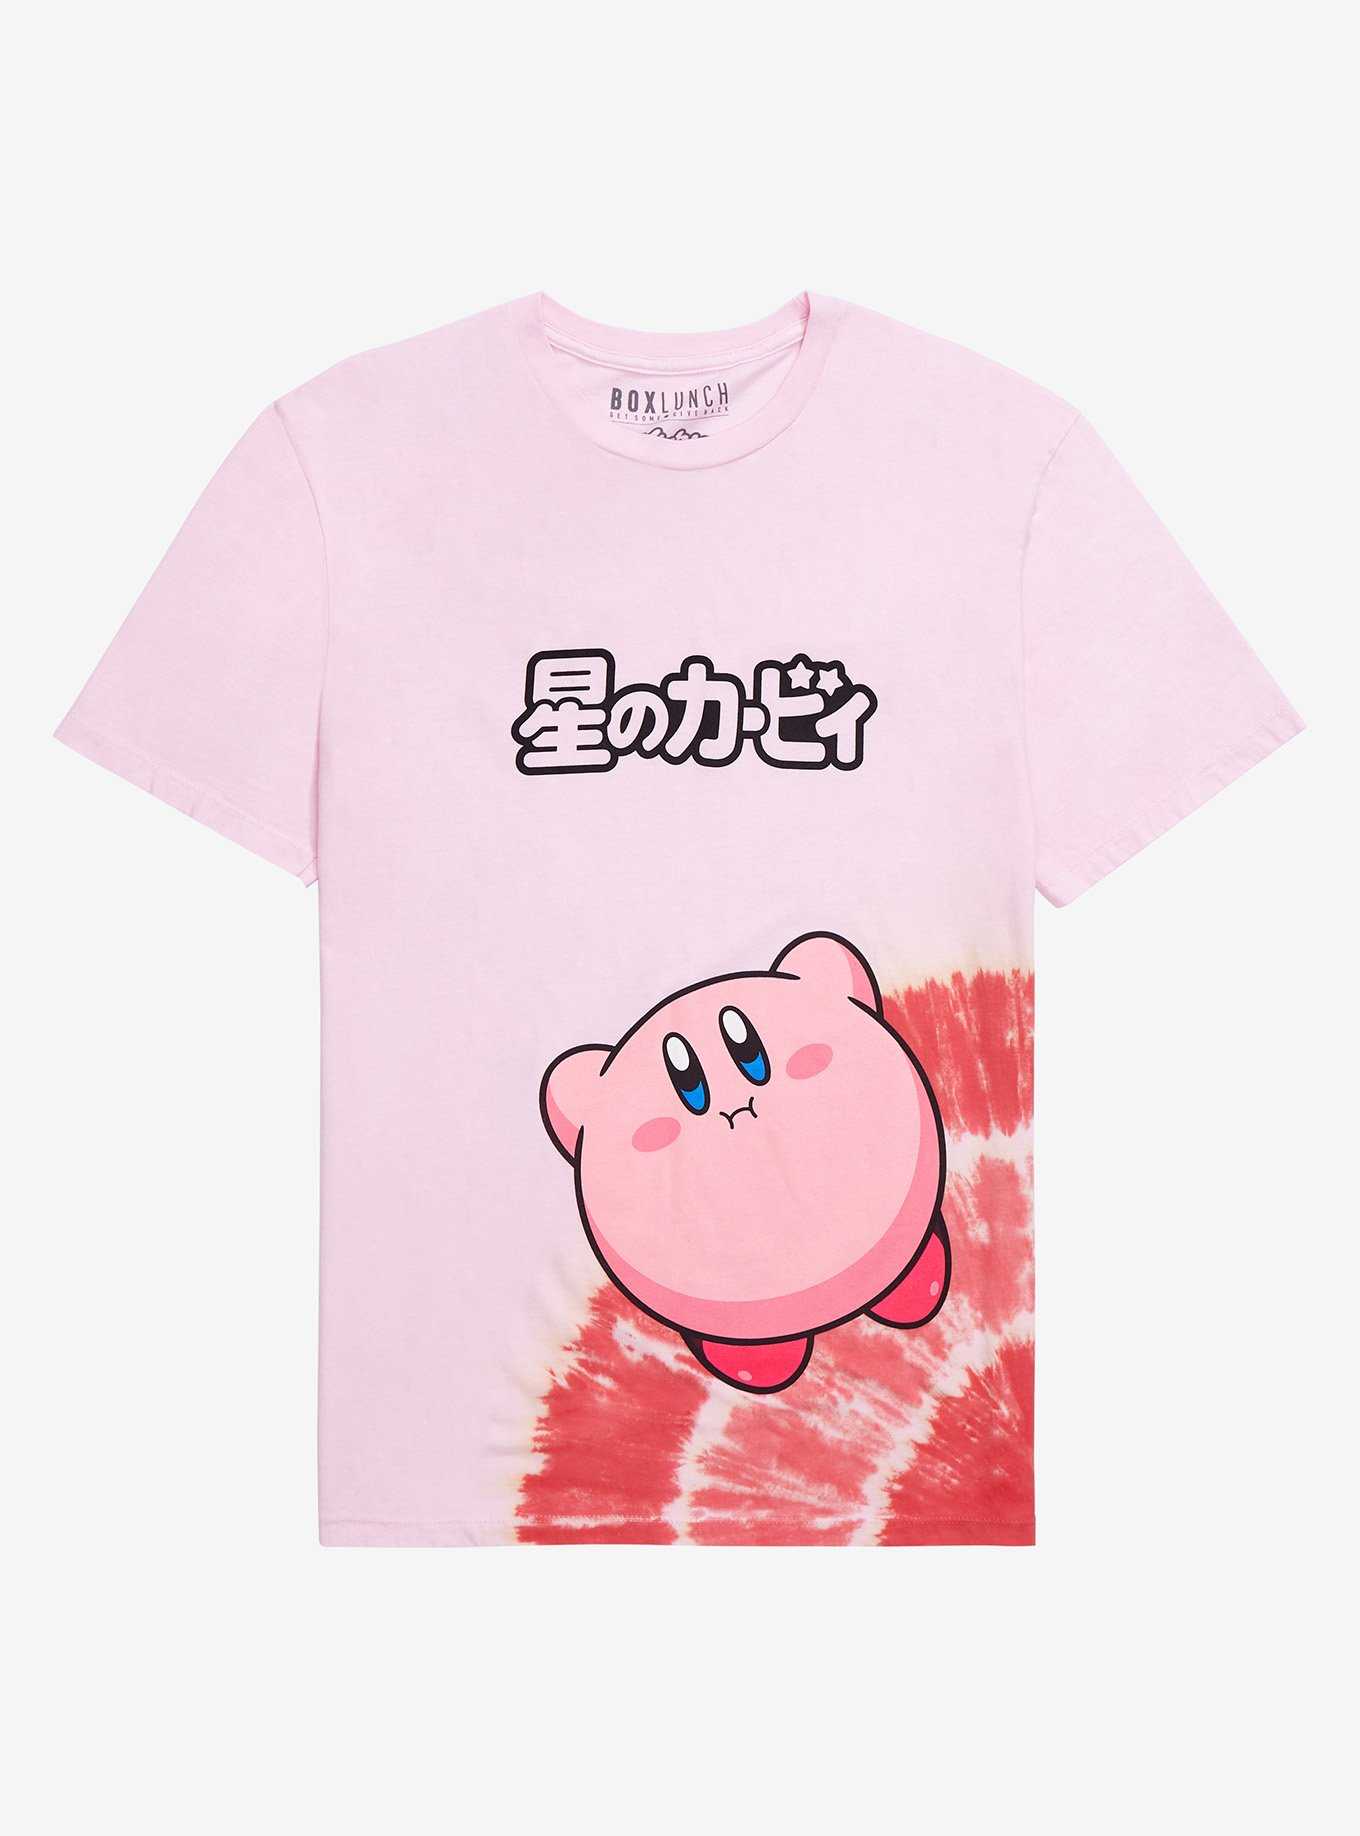 Nintendo Kirby Hovering Radial Dye T-Shirt - BoxLunch Exclusive, , hi-res